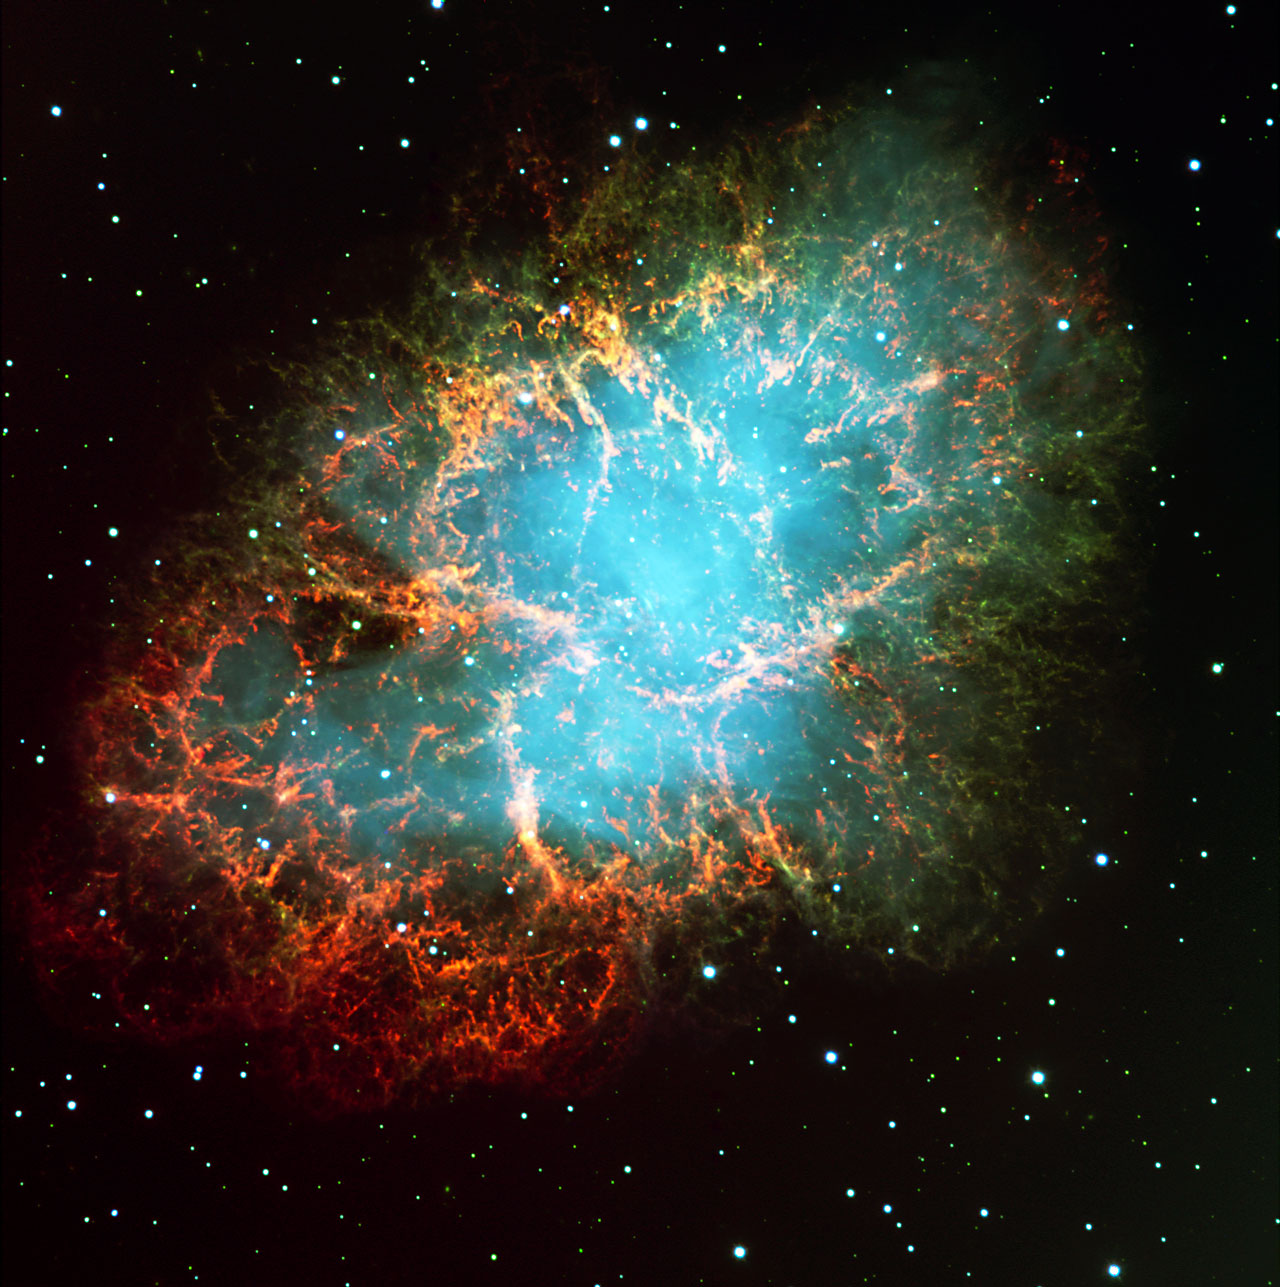 This photo shows a three colour composite of the well-known Crab Nebula (also known as Messier 1), as observed with the FORS2 instrument in imaging mode in the morning of November 10, 1999. It is the remnant of a supernova explosion at a distance of about 6,000 light-years, observed almost 1,000 years ago, in the year 1054. It contains a neutron star near its center that spins 30 times per second around its axis (see below).  In this picture, the green light is predominantly produced by hydrogen emission from material ejected by the star that exploded. The blue light is predominantly emitted by very high-energy ("relativistic") electrons that spiral in a large-scale magnetic field (so-called synchrotron emission). It is believed that these electrons are continuously accelerated and ejected by the rapidly spinning neutron star at the centre of the nebula and which is the remnant core of the exploded star. This pulsar has been identified with the lower/right of the two close stars near the geometric center of the nebula, immediately left of the small arc-like feature, best seen in ESO Press Photo eso9948. Technical information: ESO Press Photo eso9948 is based on a composite of three images taken through three different optical filters: B (429 nm; FWHM 88 nm; 5 min; here rendered as blue), R (657 nm; FWHM 150 nm; 1 min; green) and S II (673 nm; FWHM 6 nm; 5 min; red) during periods of 0.65 arcsec (R, S II) and 0.80 (B) seeing, respectively. The field shown measures 6.8 x 6.8 arcminutes and the images were recorded in frames of 2048 x 2048 pixels, each measuring 0.2 arcseconds. North is up; East is left.  Image Credit: ESO Explanation from: http://www.eso.org/public/images/eso9948f/